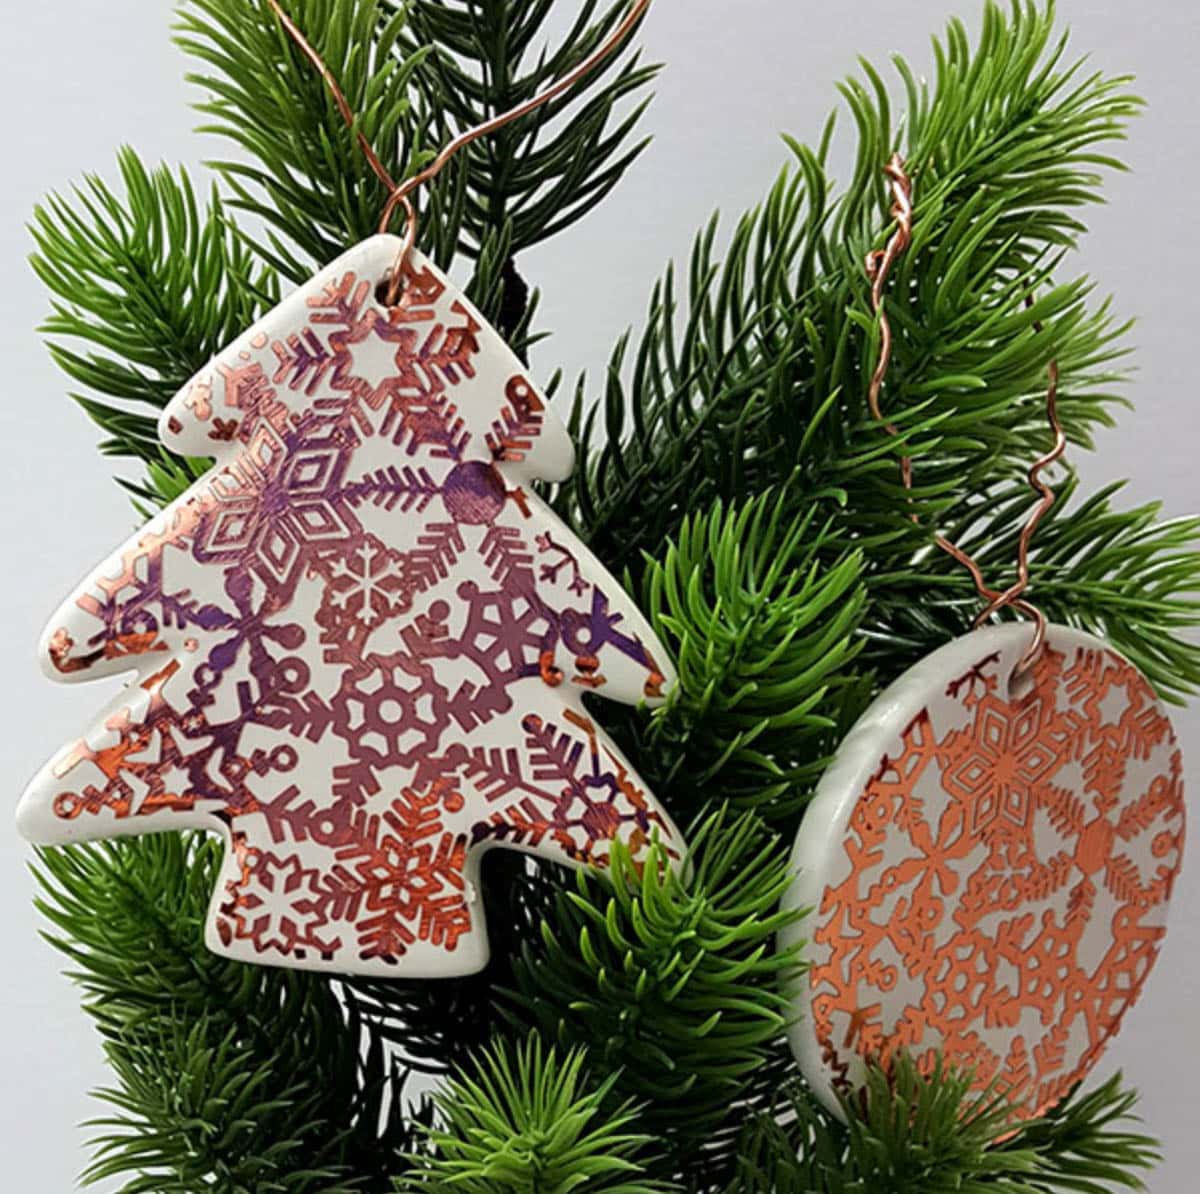 Ceramic ornaments with copper accents added using Cricut 